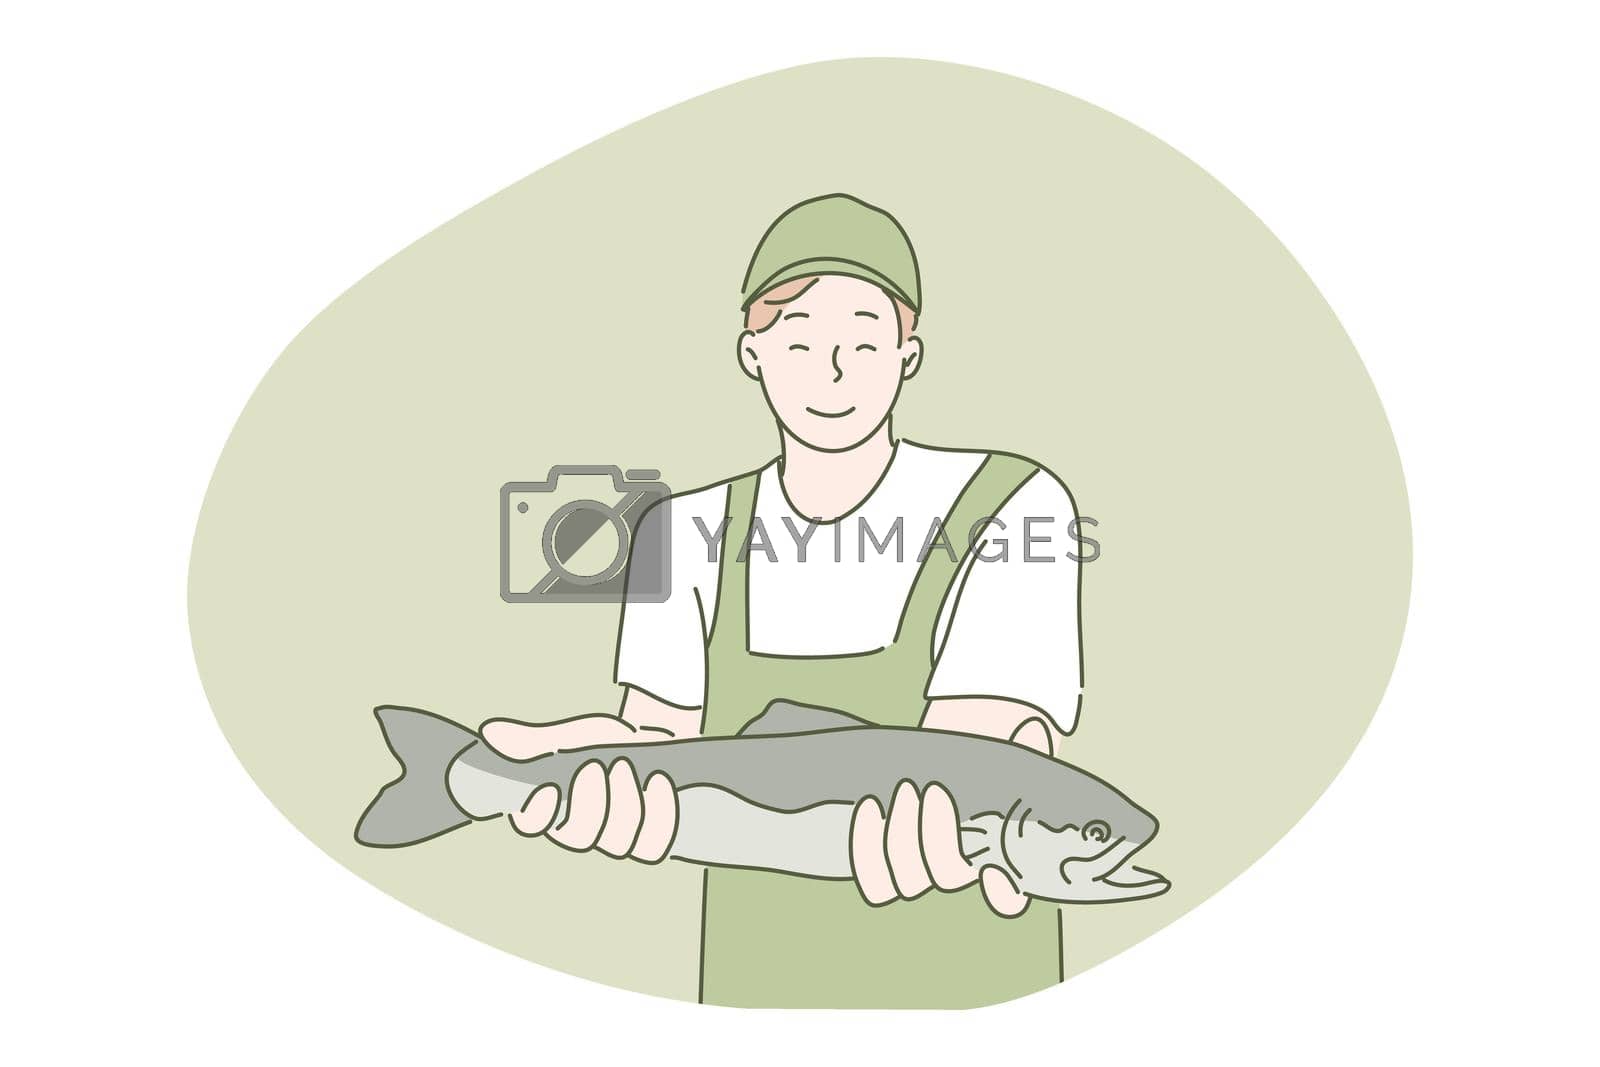 Royalty free image of Hobby, fishing, catch concept by VECTORIUM